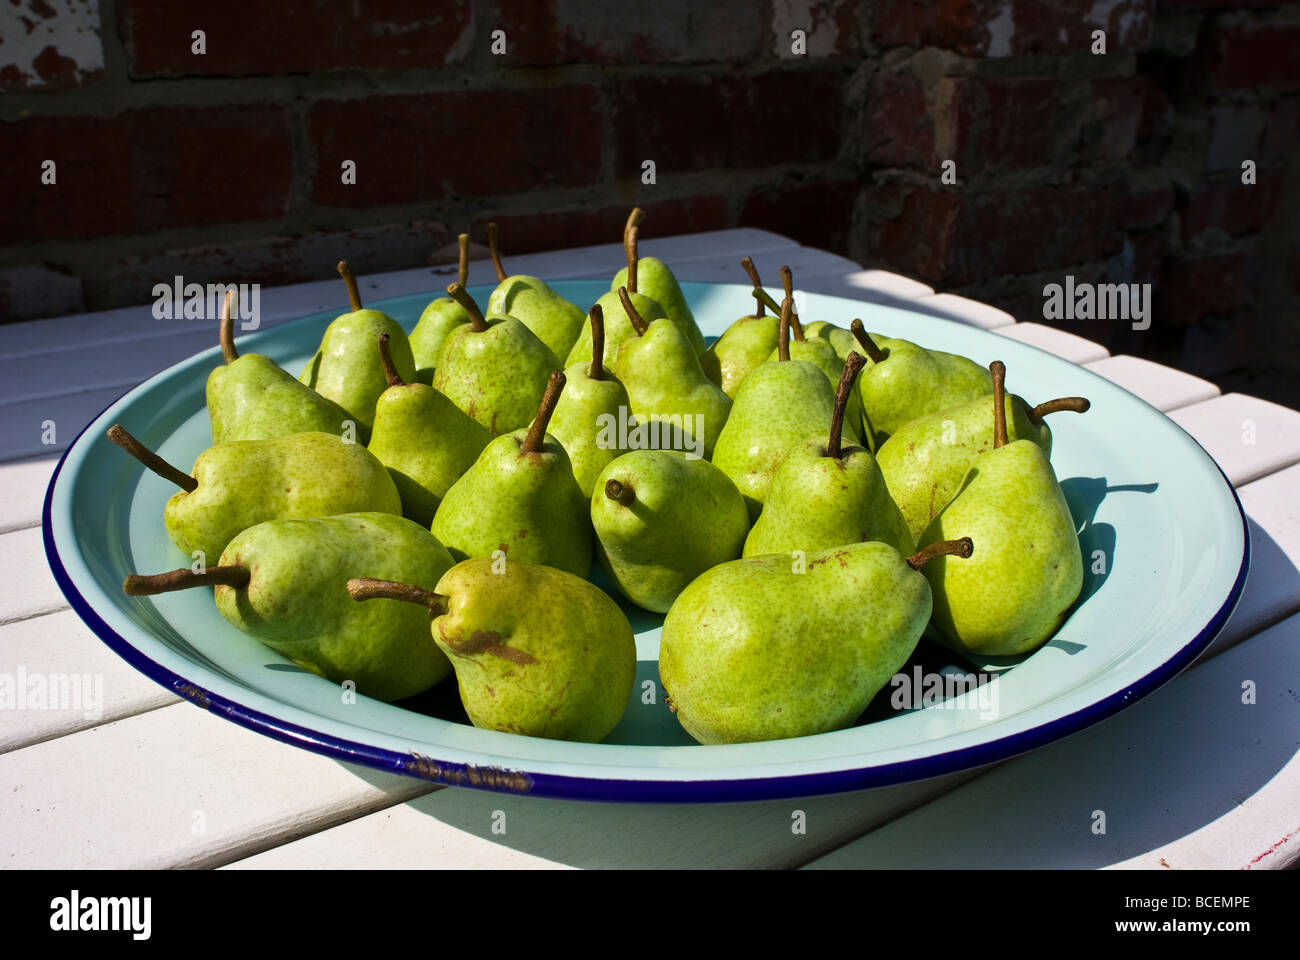 A plate of ripe delicious pears on a platter in a garden. Stock Photo